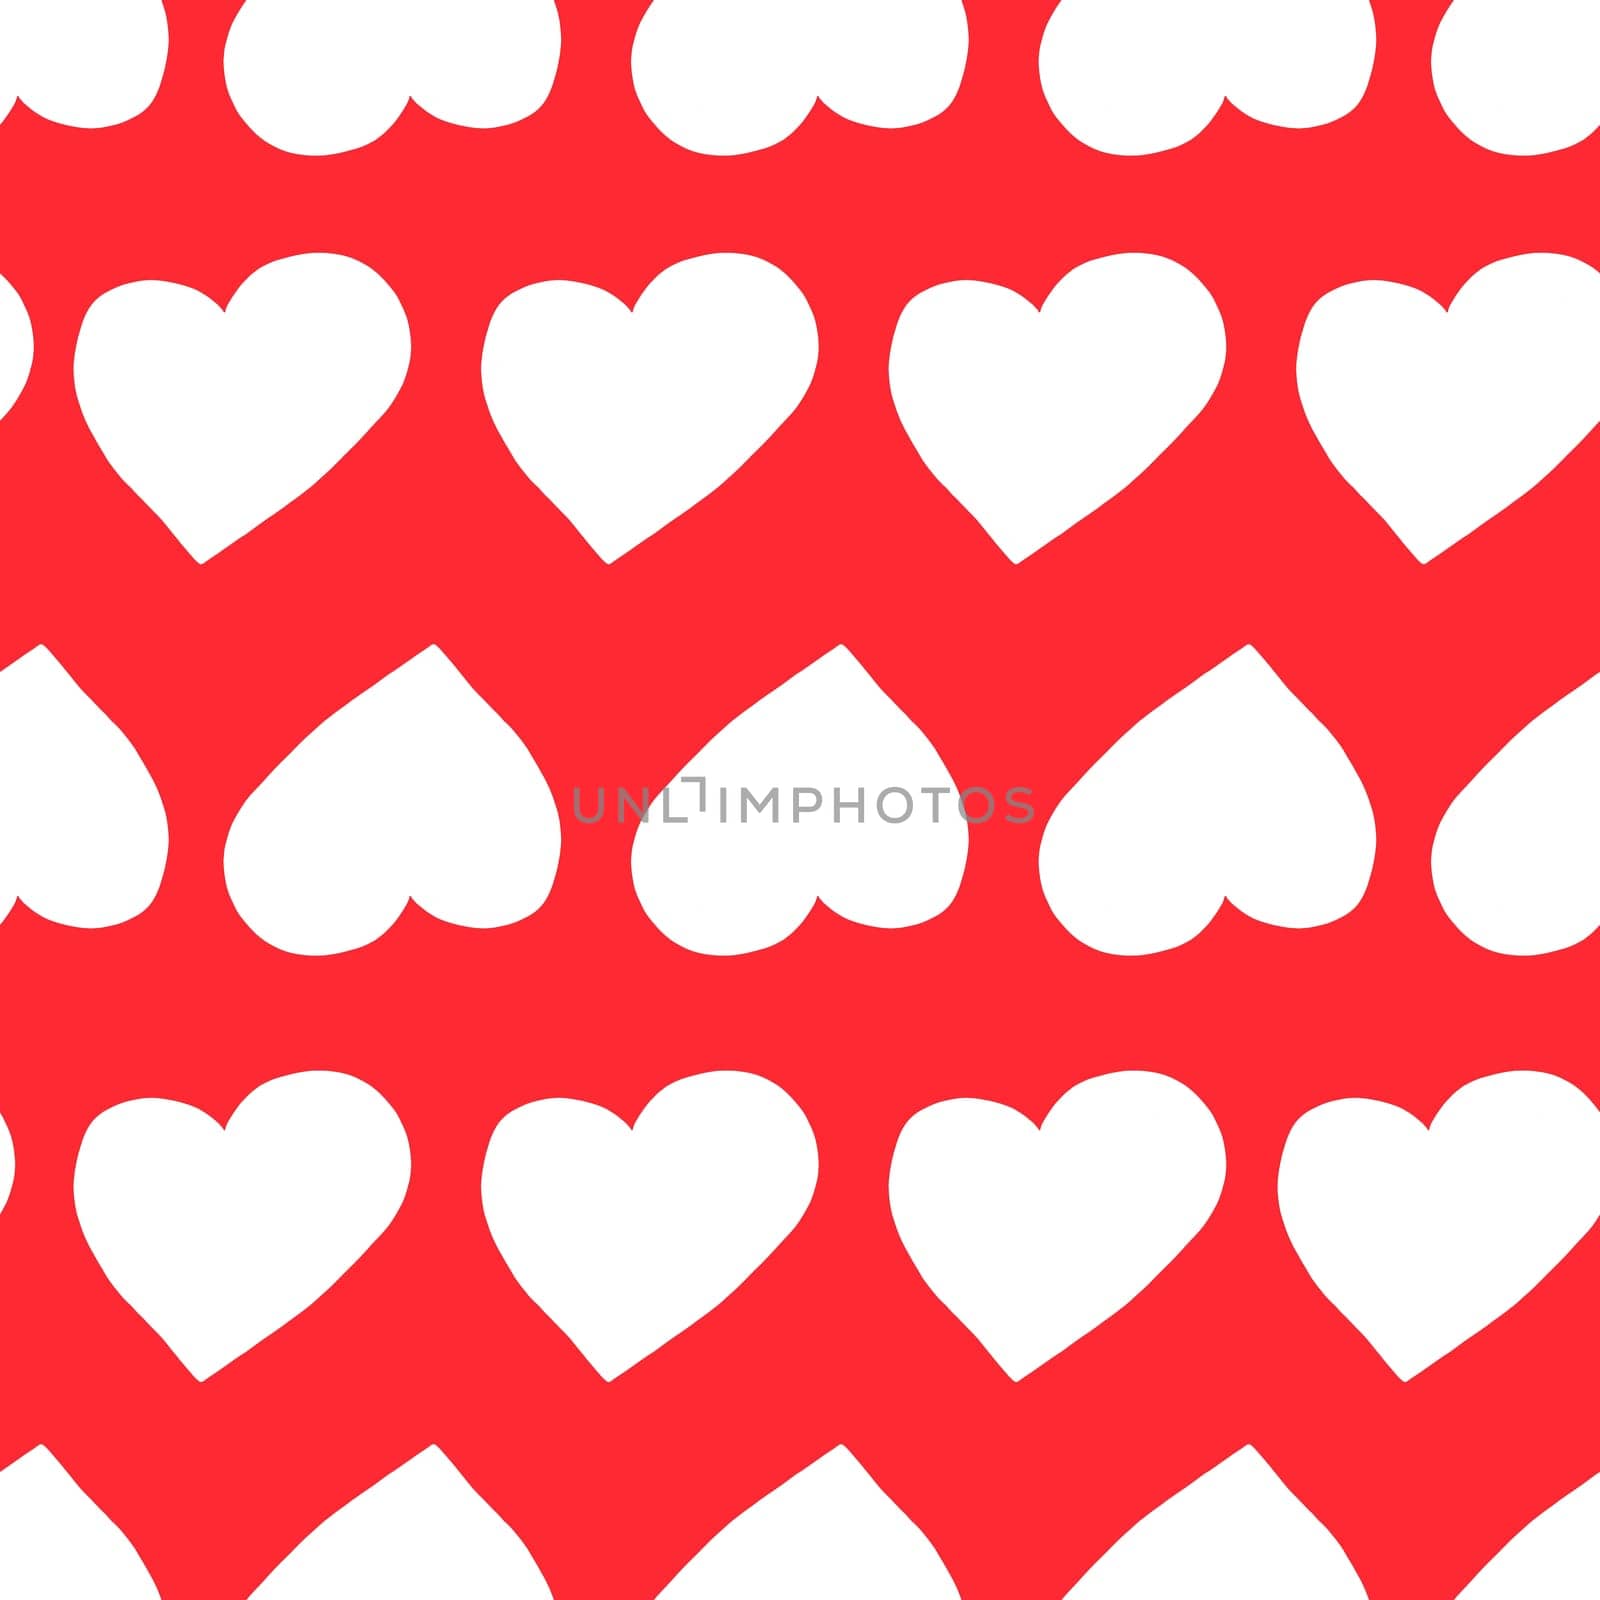 Seamless Pattern with Hearts. Hand Drawn Valentines Background. White Hearts on Red Background. Digital Paper Drawn by Colored Pencils.